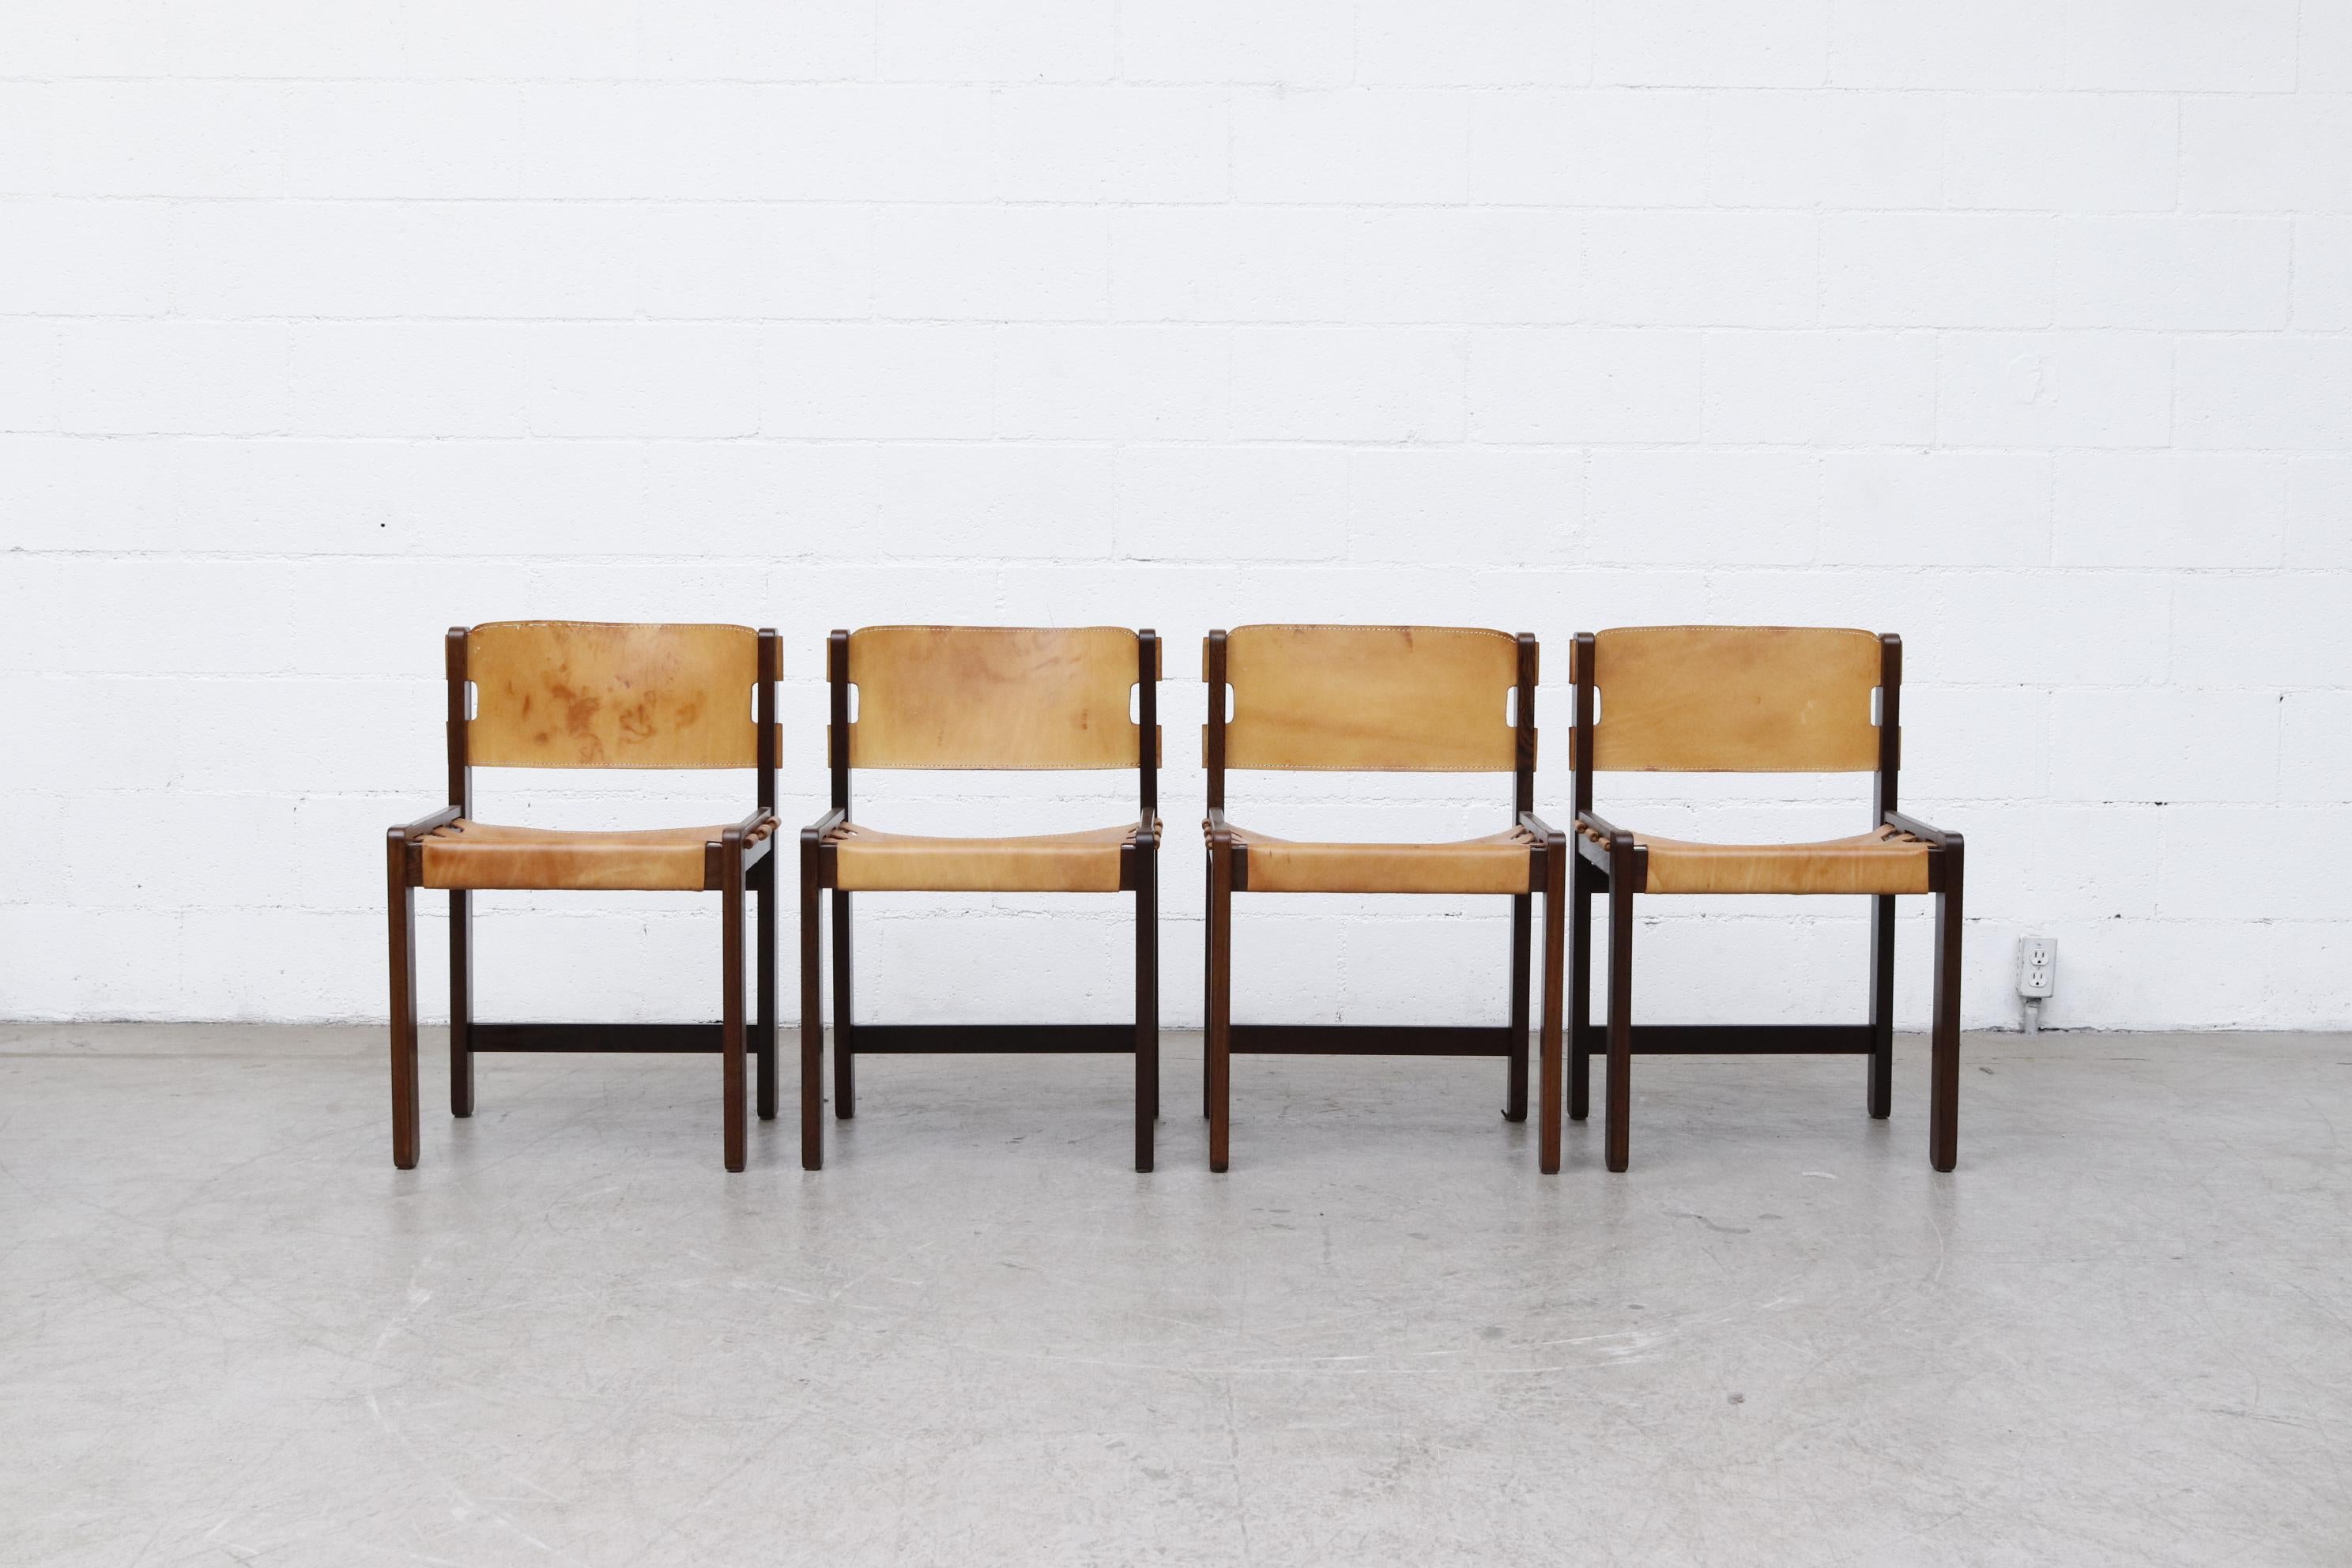 Gorgeous set of 4 Martin Visser leather dining chairs. Heavy Wenge frame with sling leather seating. Striking mid-century design, in original condition with visible wear and patina. Wear is consistent with age and use. Seat measures 17.375 x 14.5.